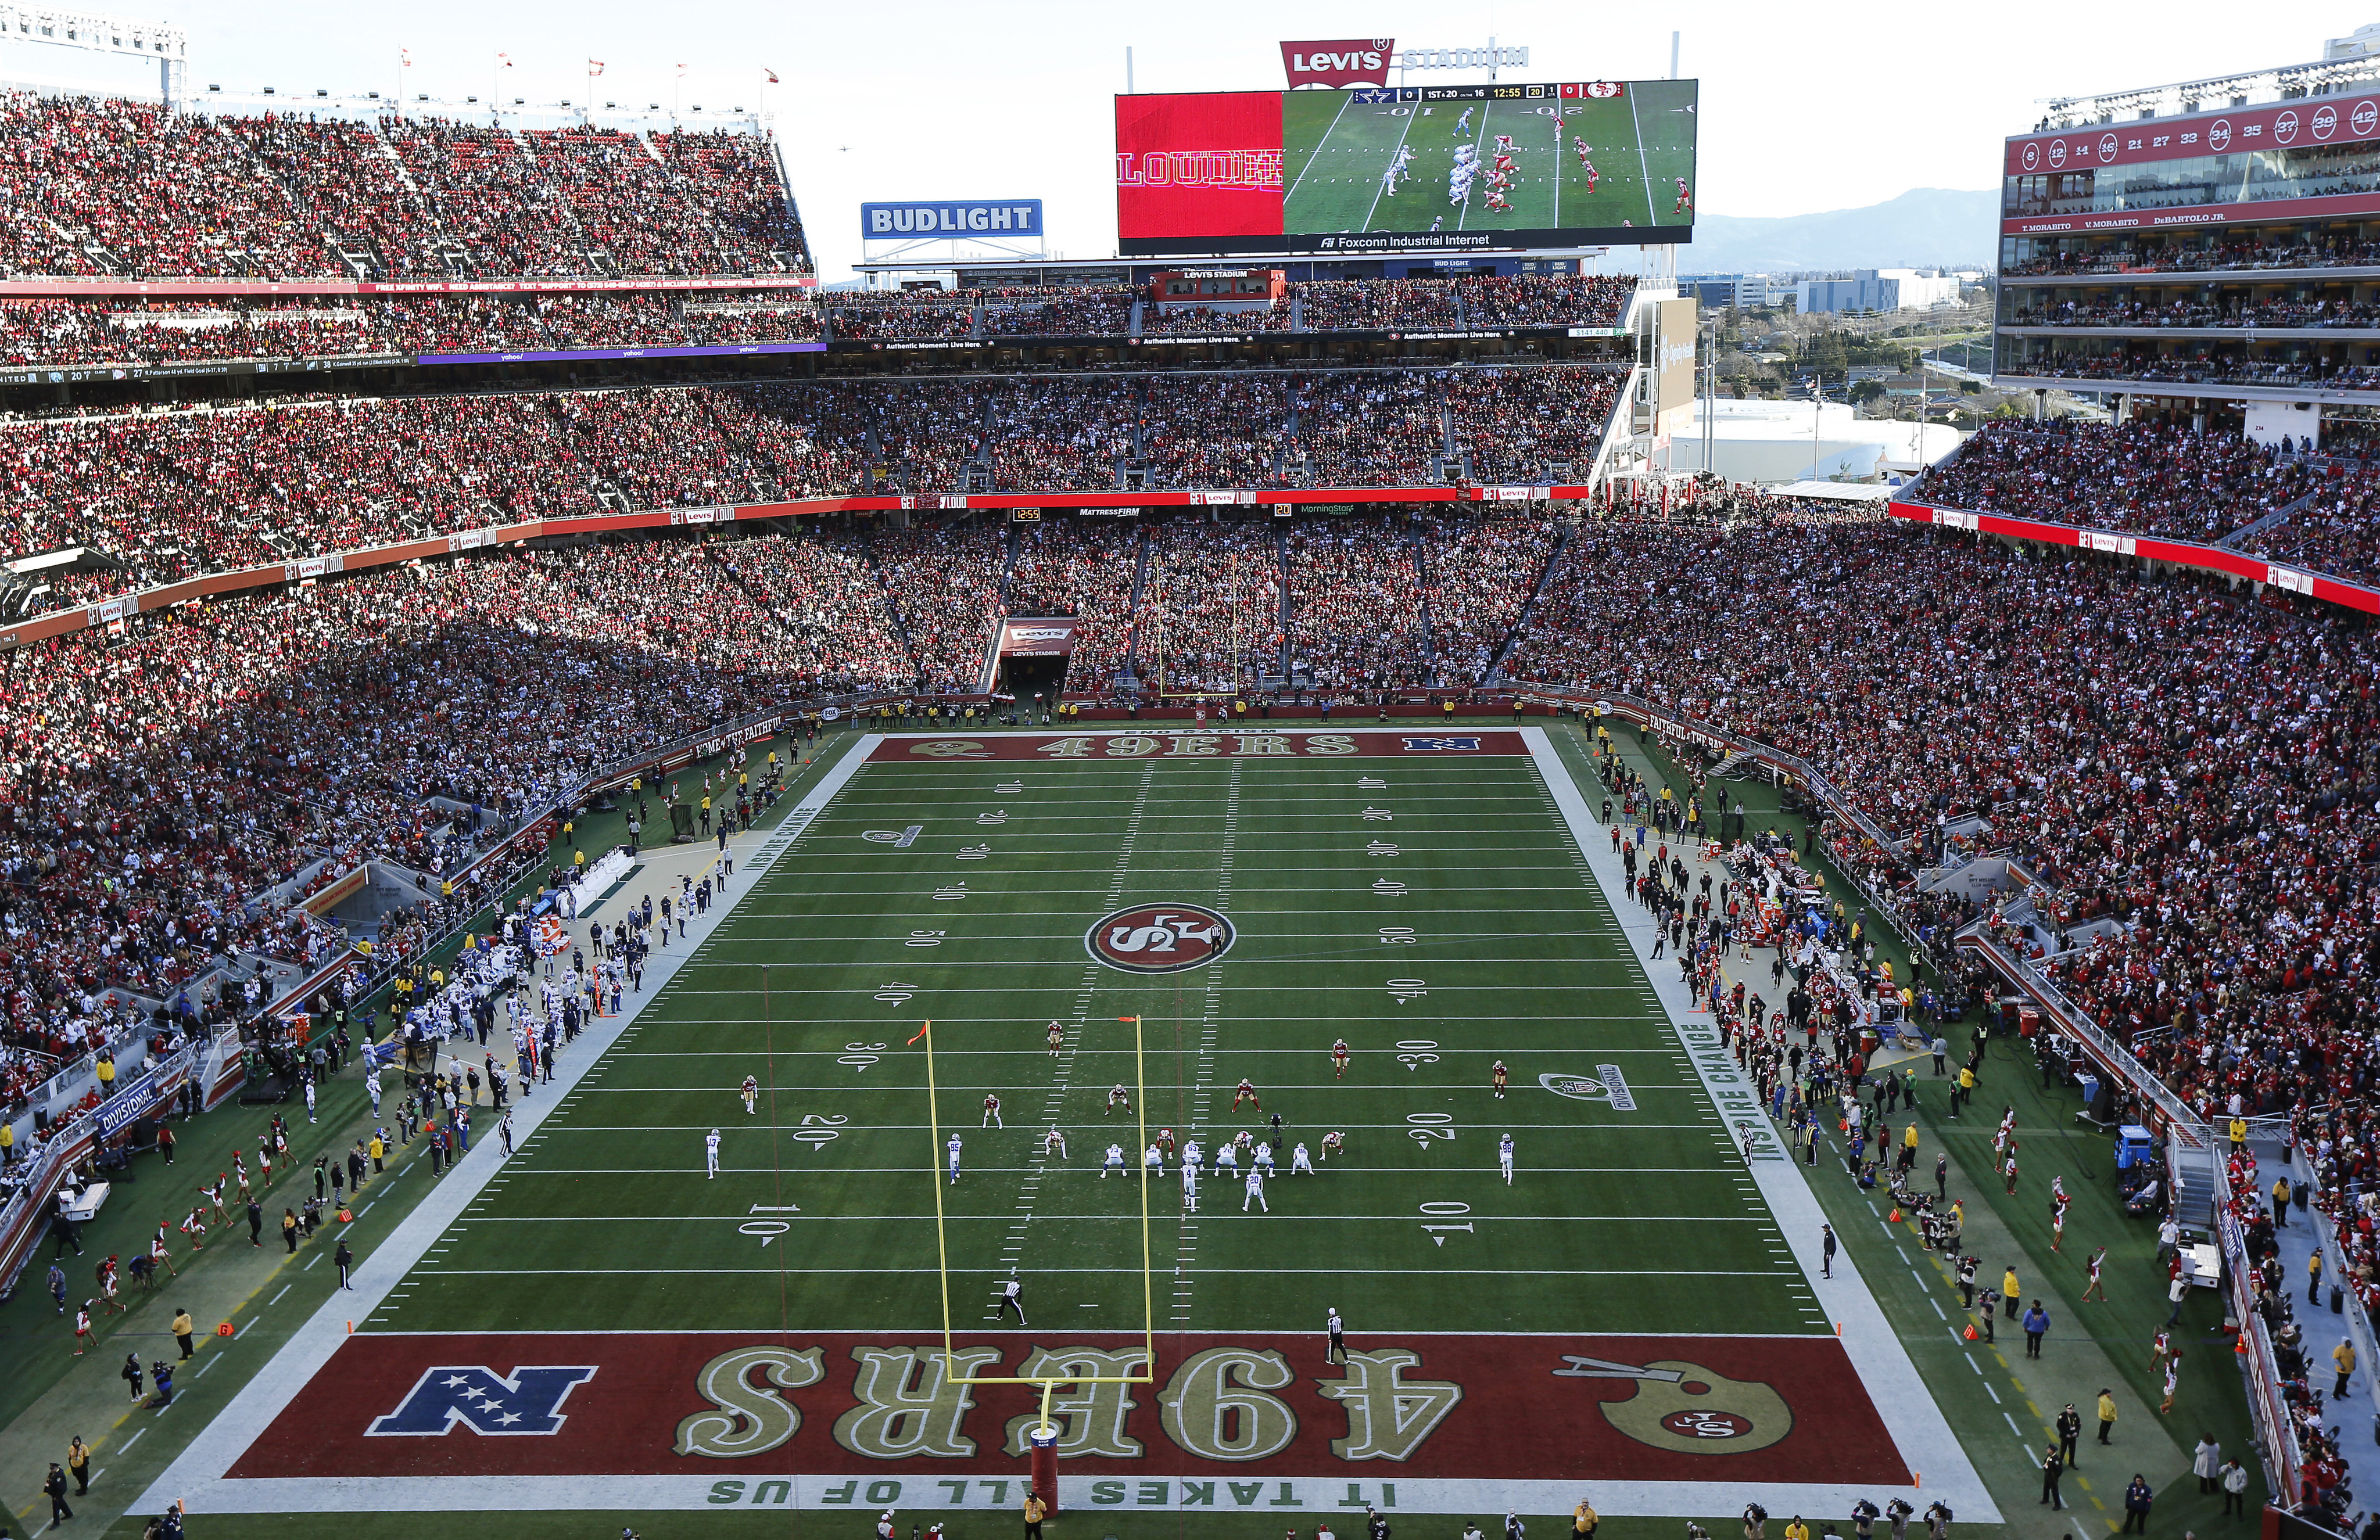 Super Bowl goes back to Bay Area; 49ers to host in 2026 at Levi's Stadium